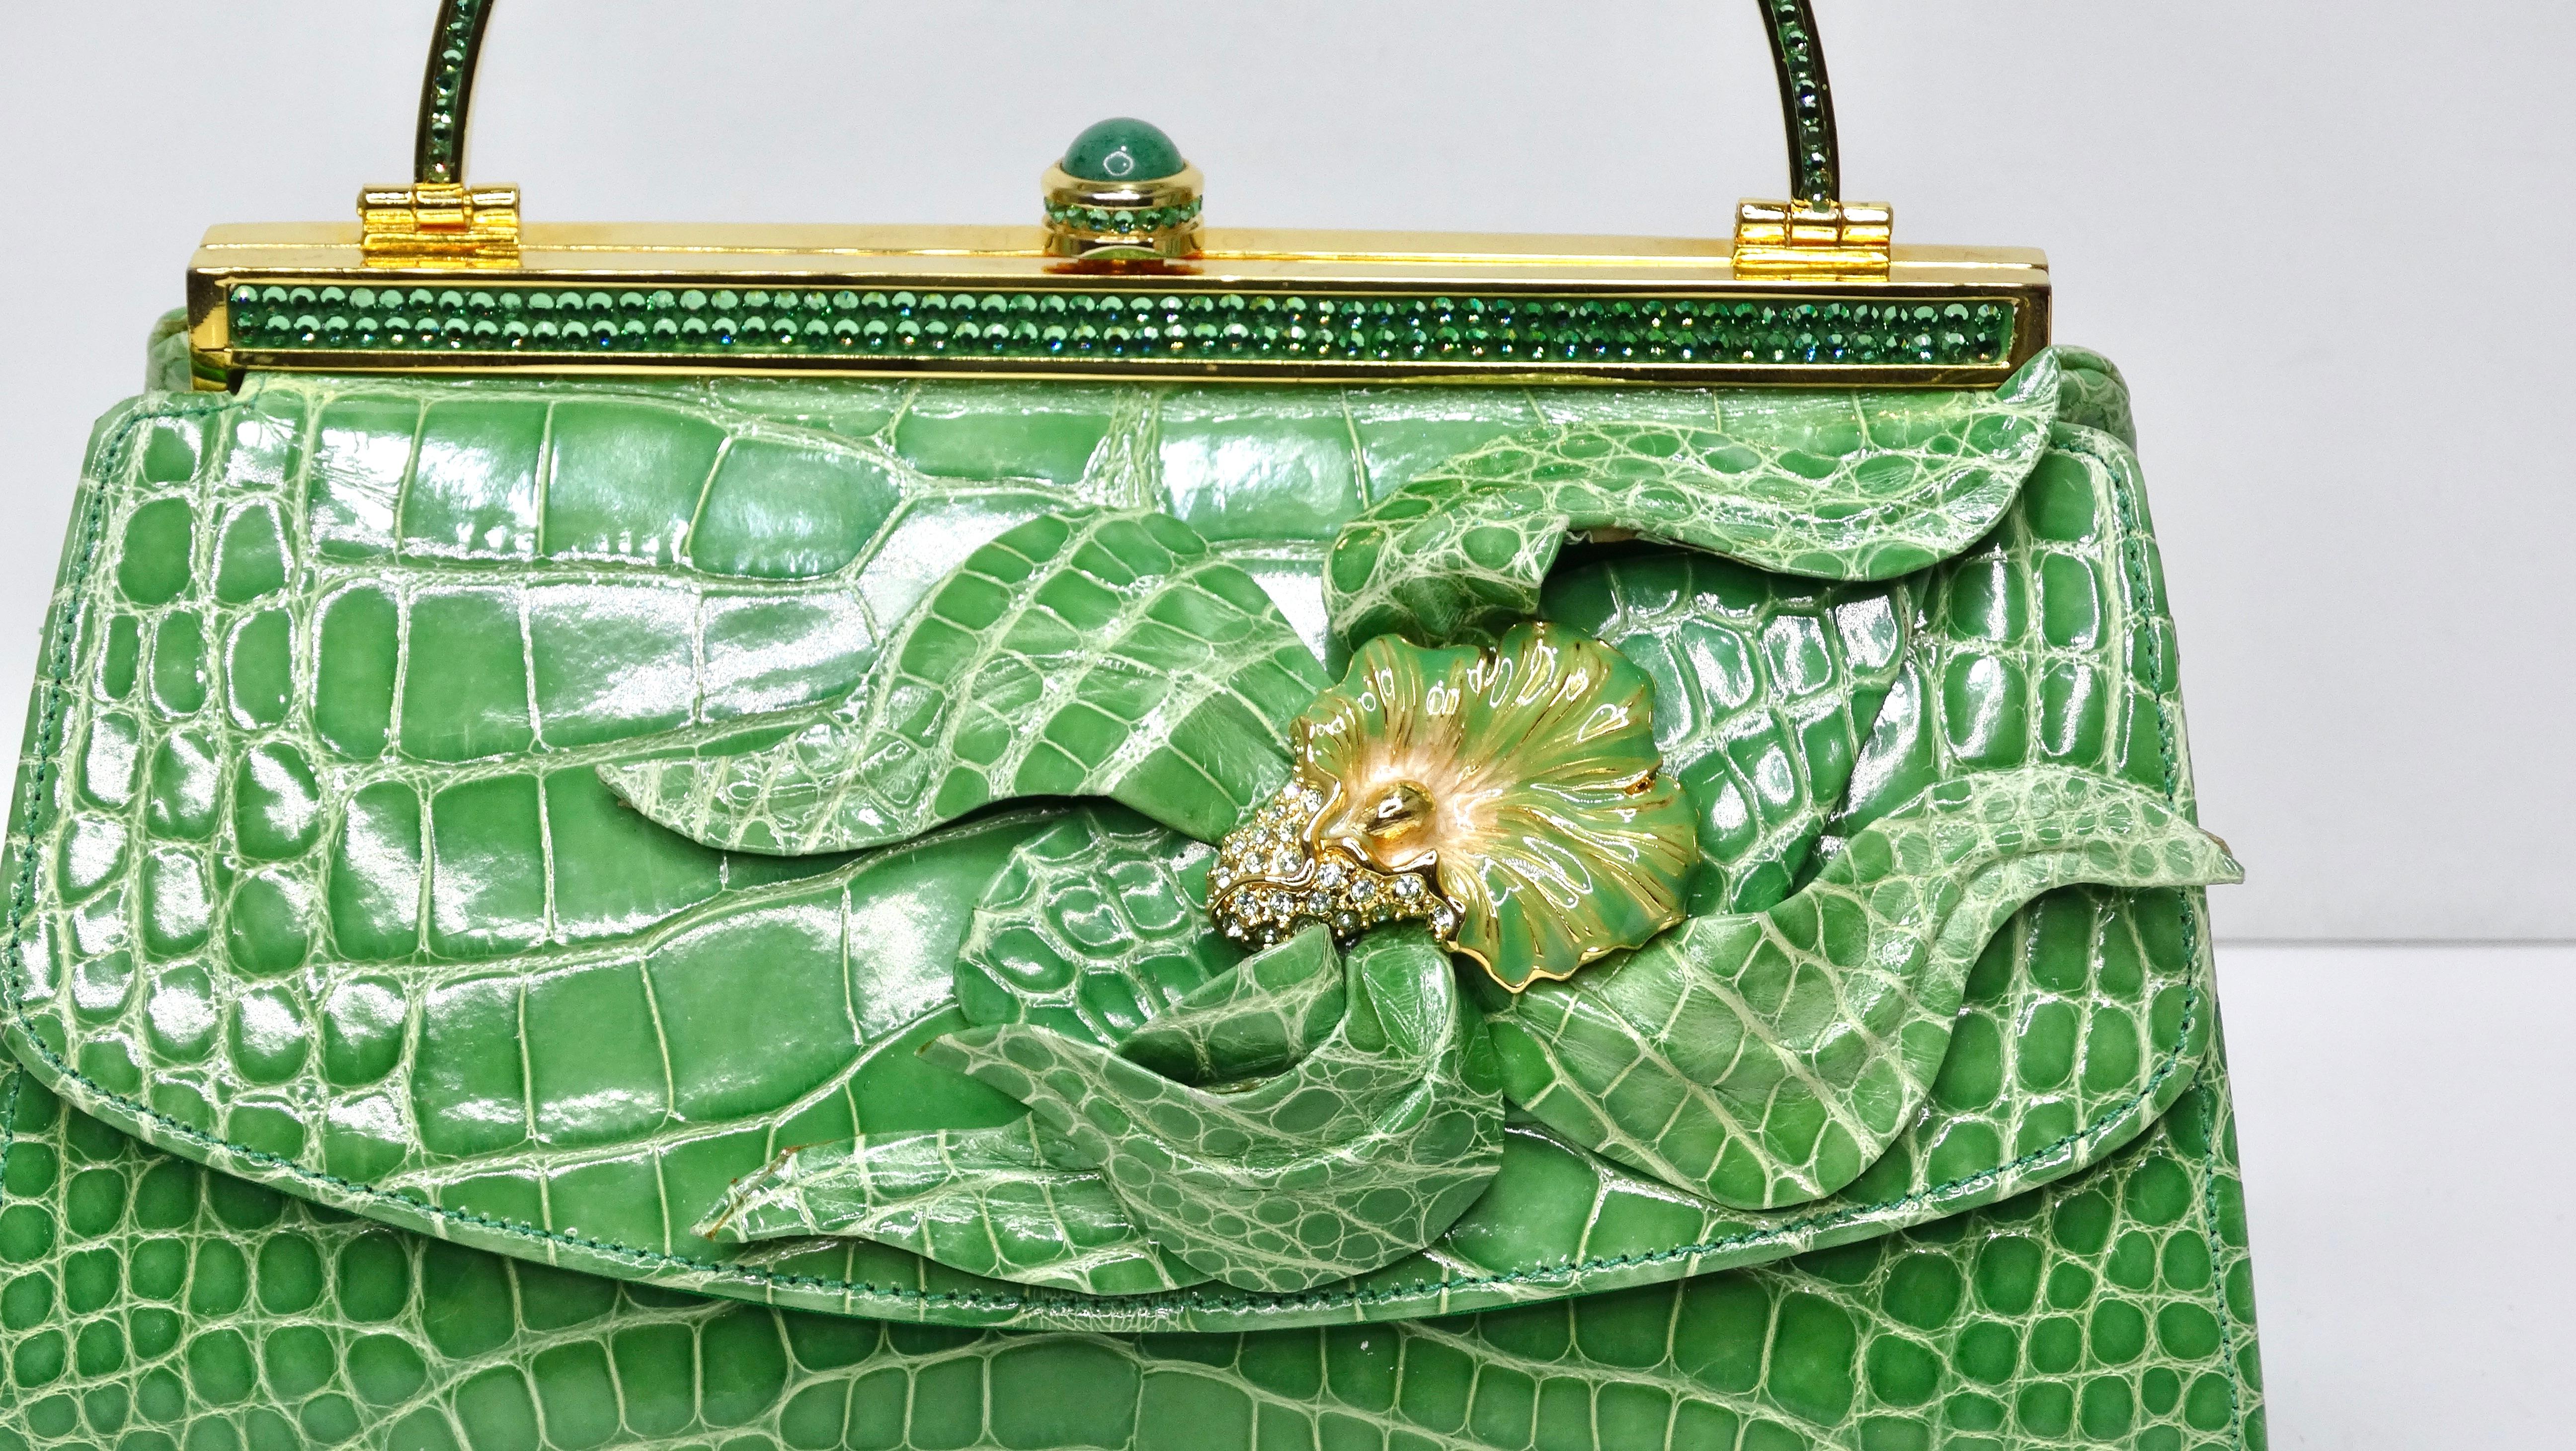 Elegance and glamor right this way! This is a highly designed handbag by none other than Judith Leiber that will be sure to catch people's attention from across the room. This is a BEAUTIFUL Judith Leiber in genuine green alligator in excellent